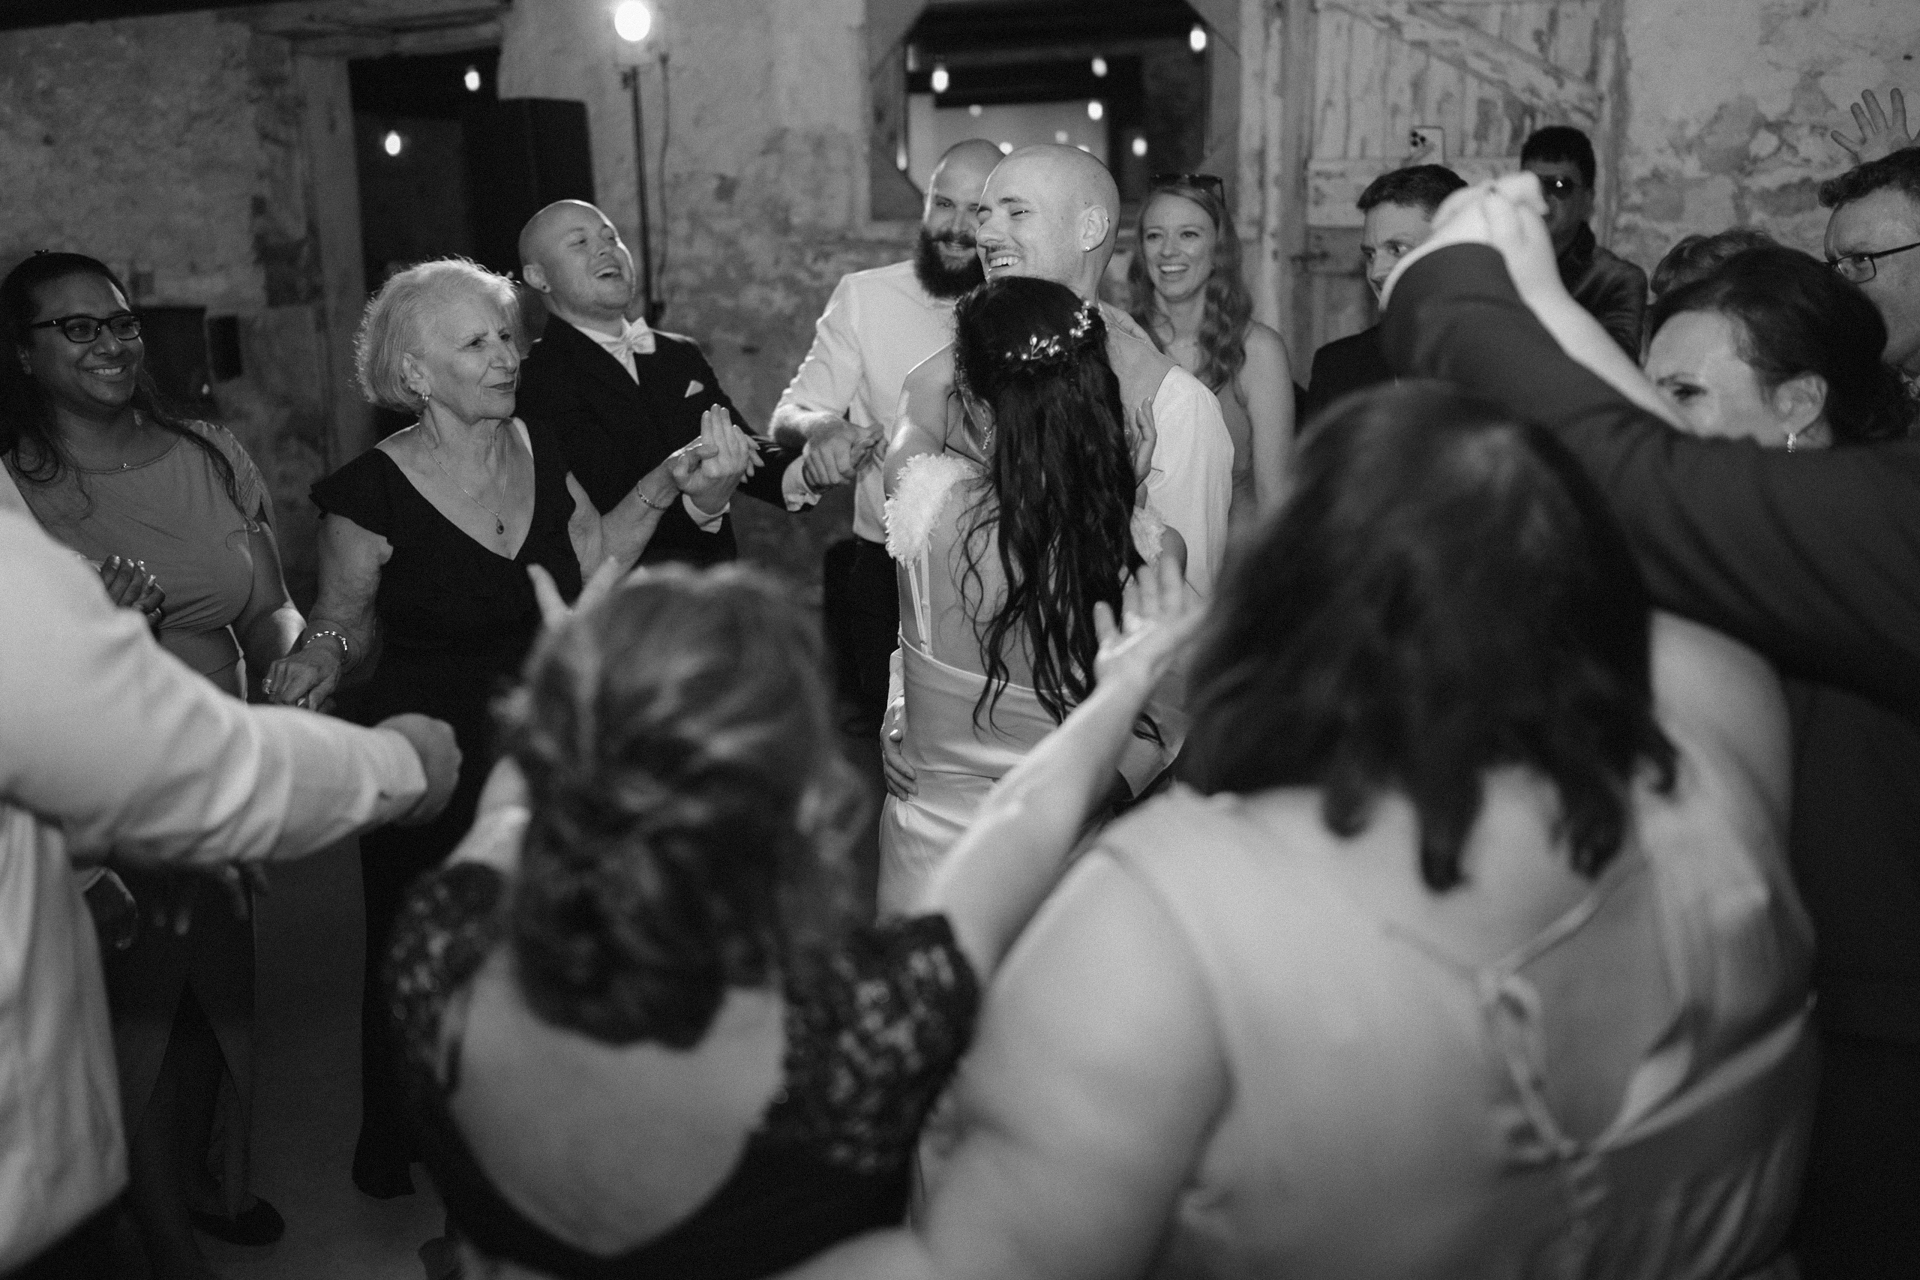 Bride and groom joyfully dancing with guests surround them at a wedding reception.